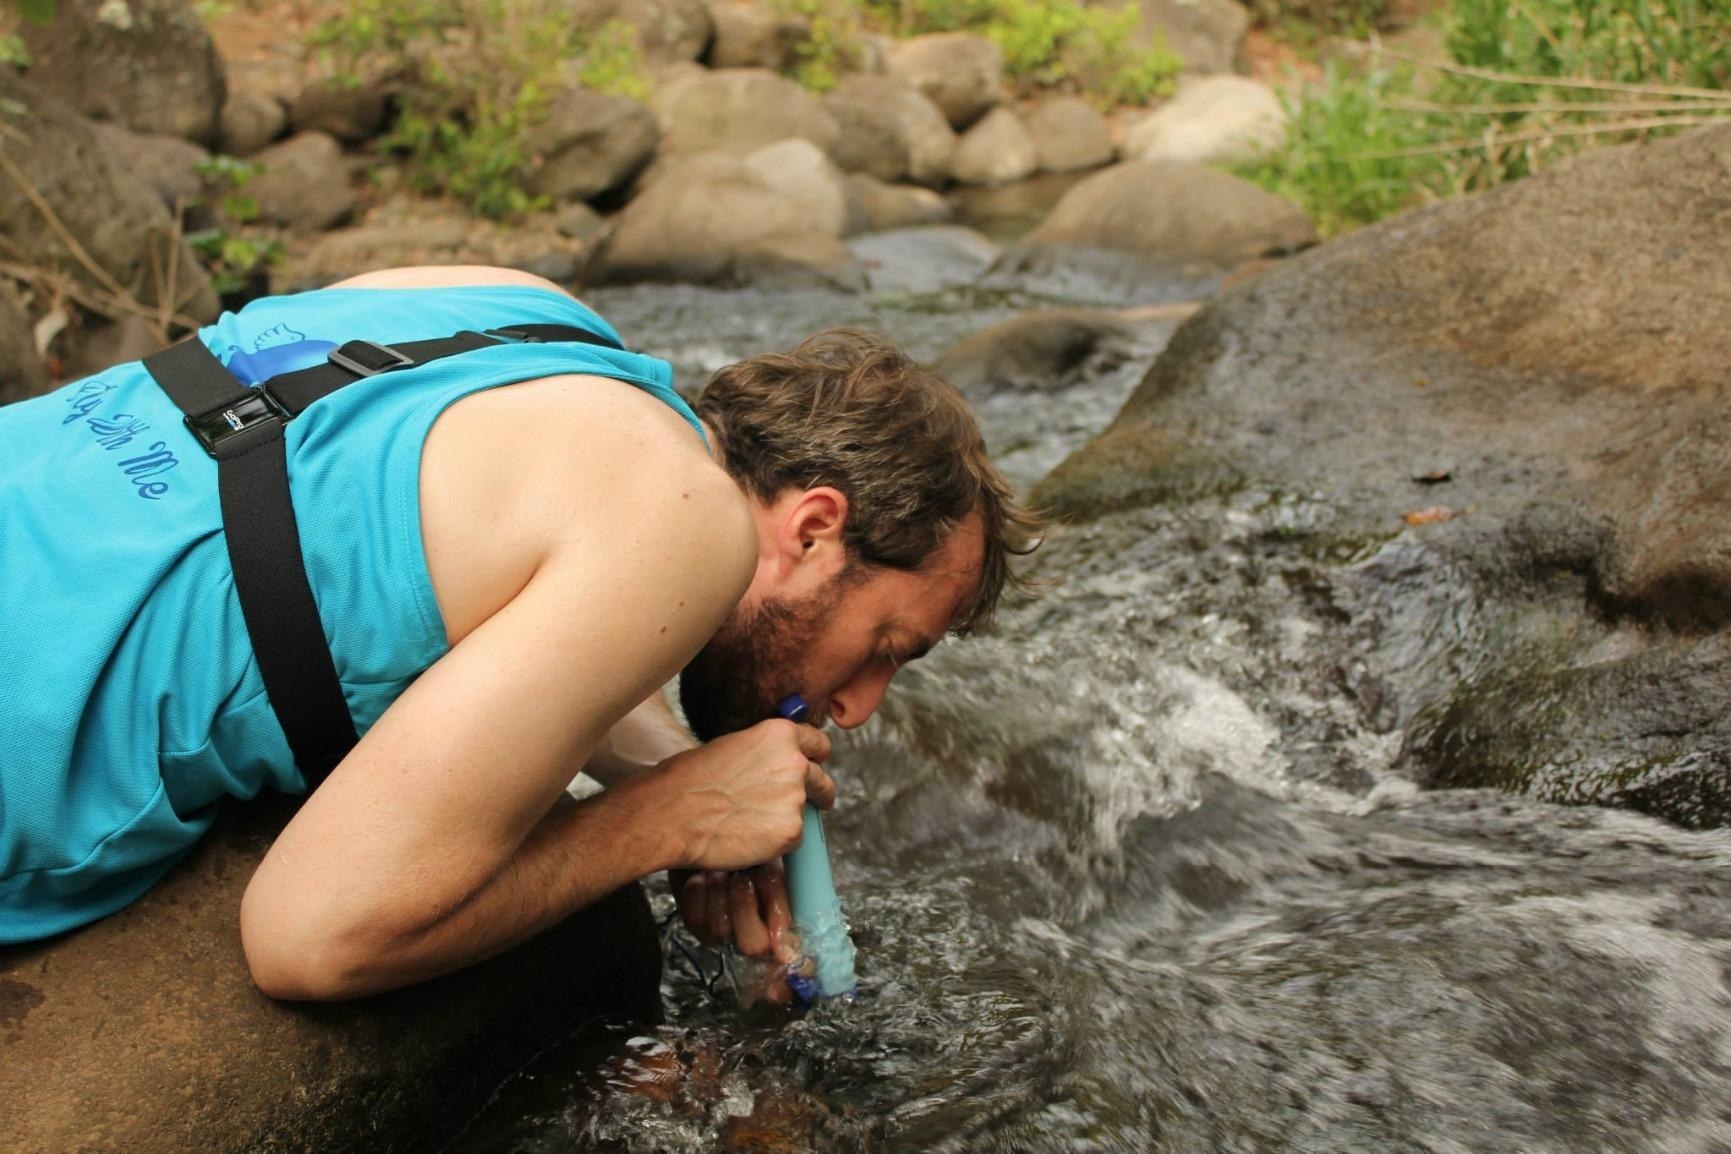 Reviewer is drinking water from a river using a Lifestraw